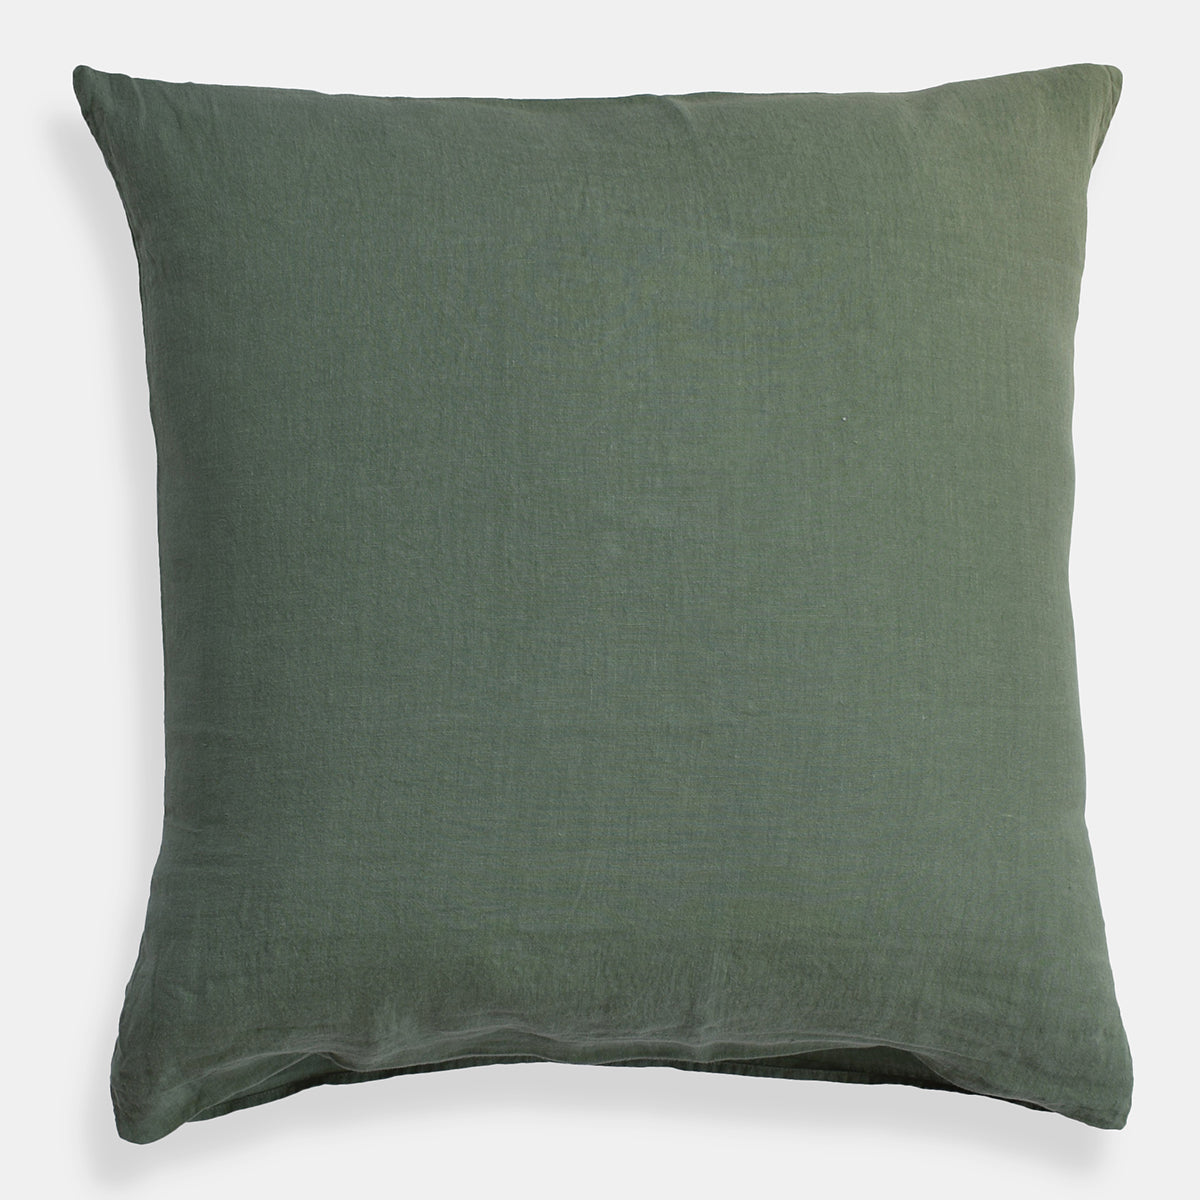 Linge Particulier Jade Green Euro Linen Pillowcase Sham for a colorful linen bedding look in camo green - Collyer's Mansion